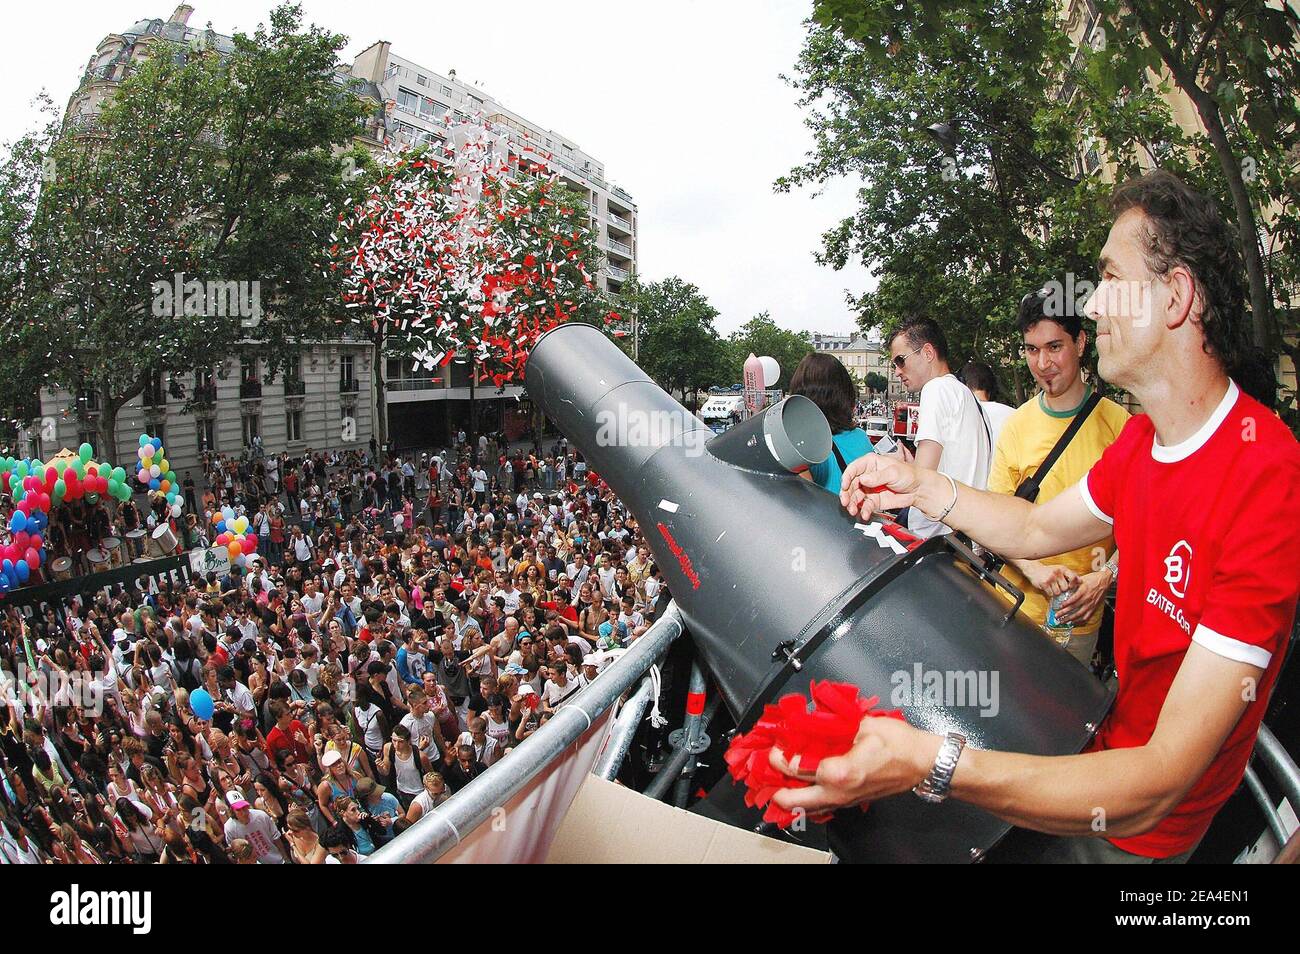 Gay Pride in Paris, France, on June 25, 2005. Photo by Thibault Daliphard/ABACA Stock Photo